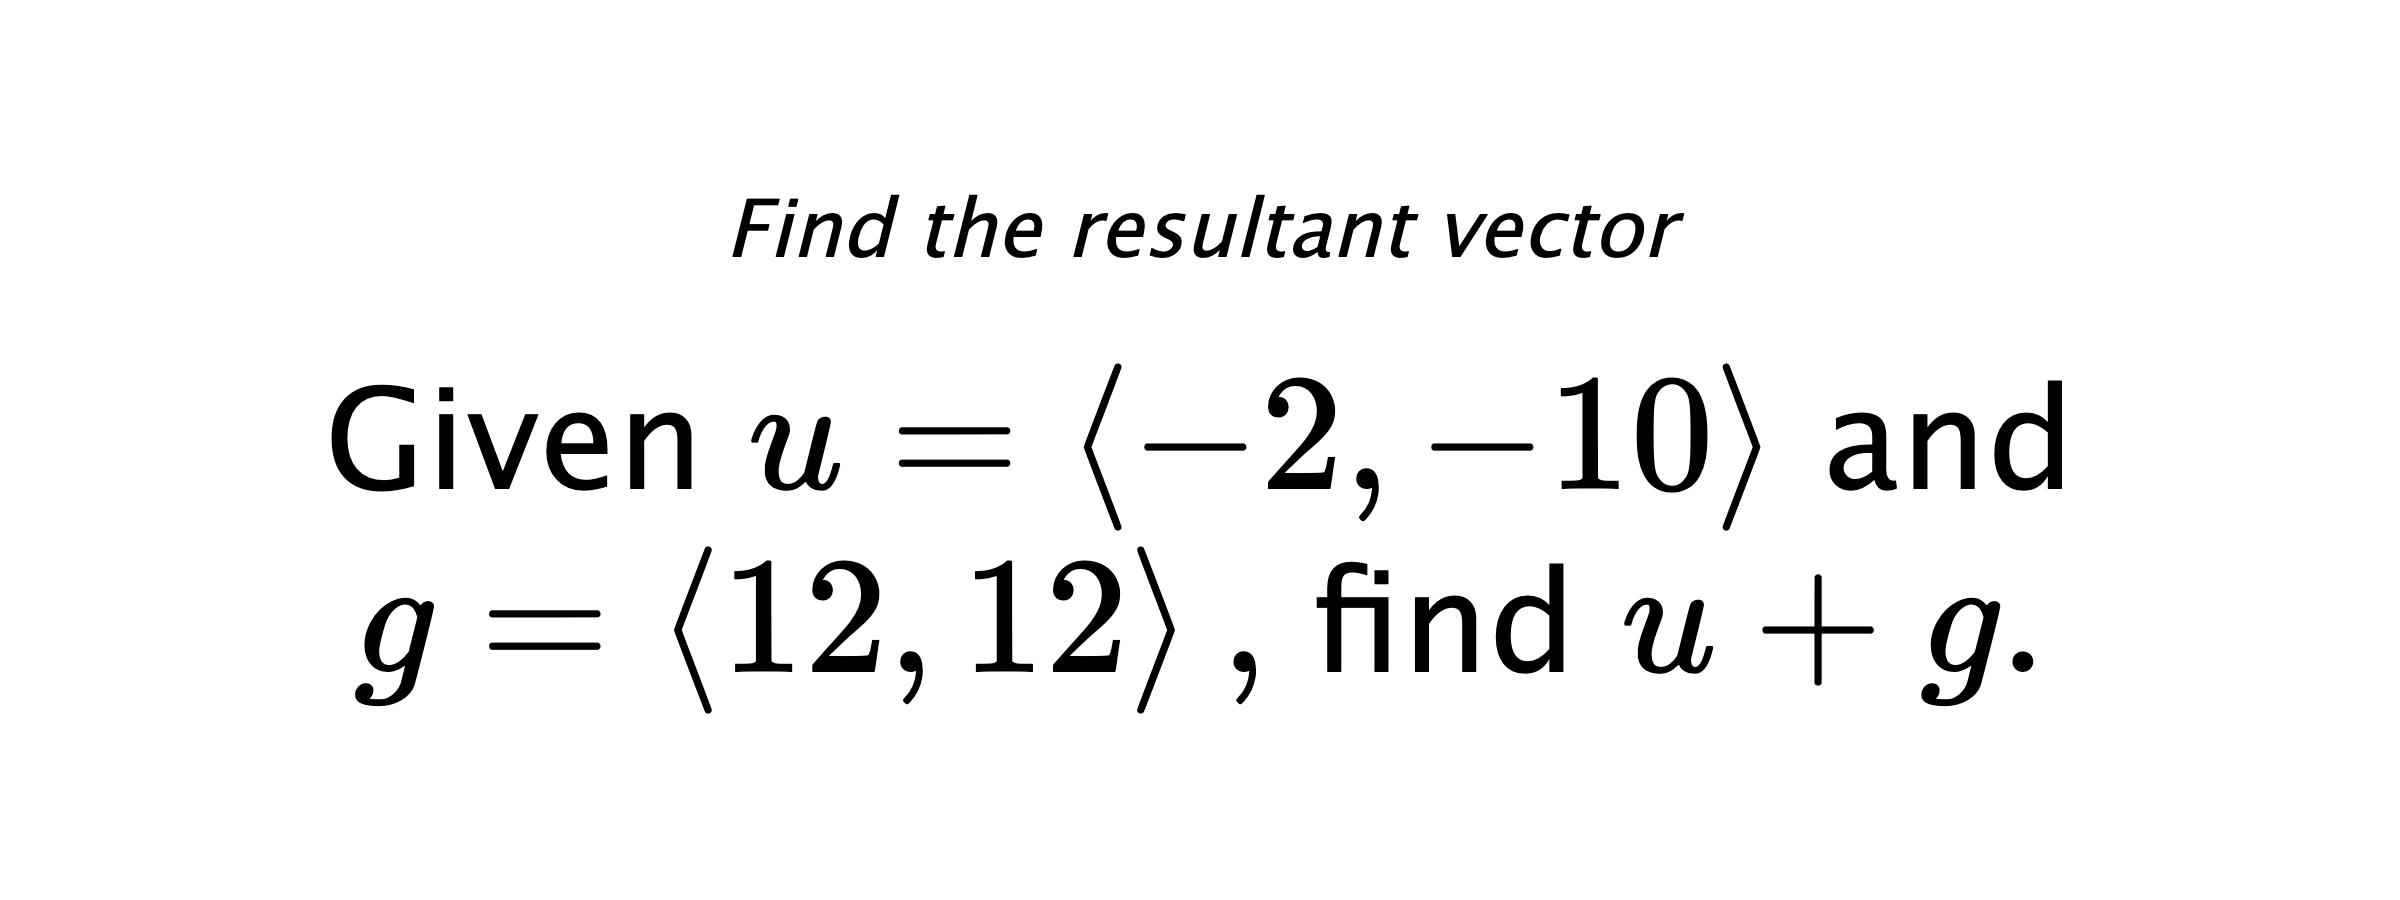 Find the resultant vector Given $ u = \left< -2,-10 \right> $ and $ g = \left< 12,12 \right> ,$ find $ u+g .$